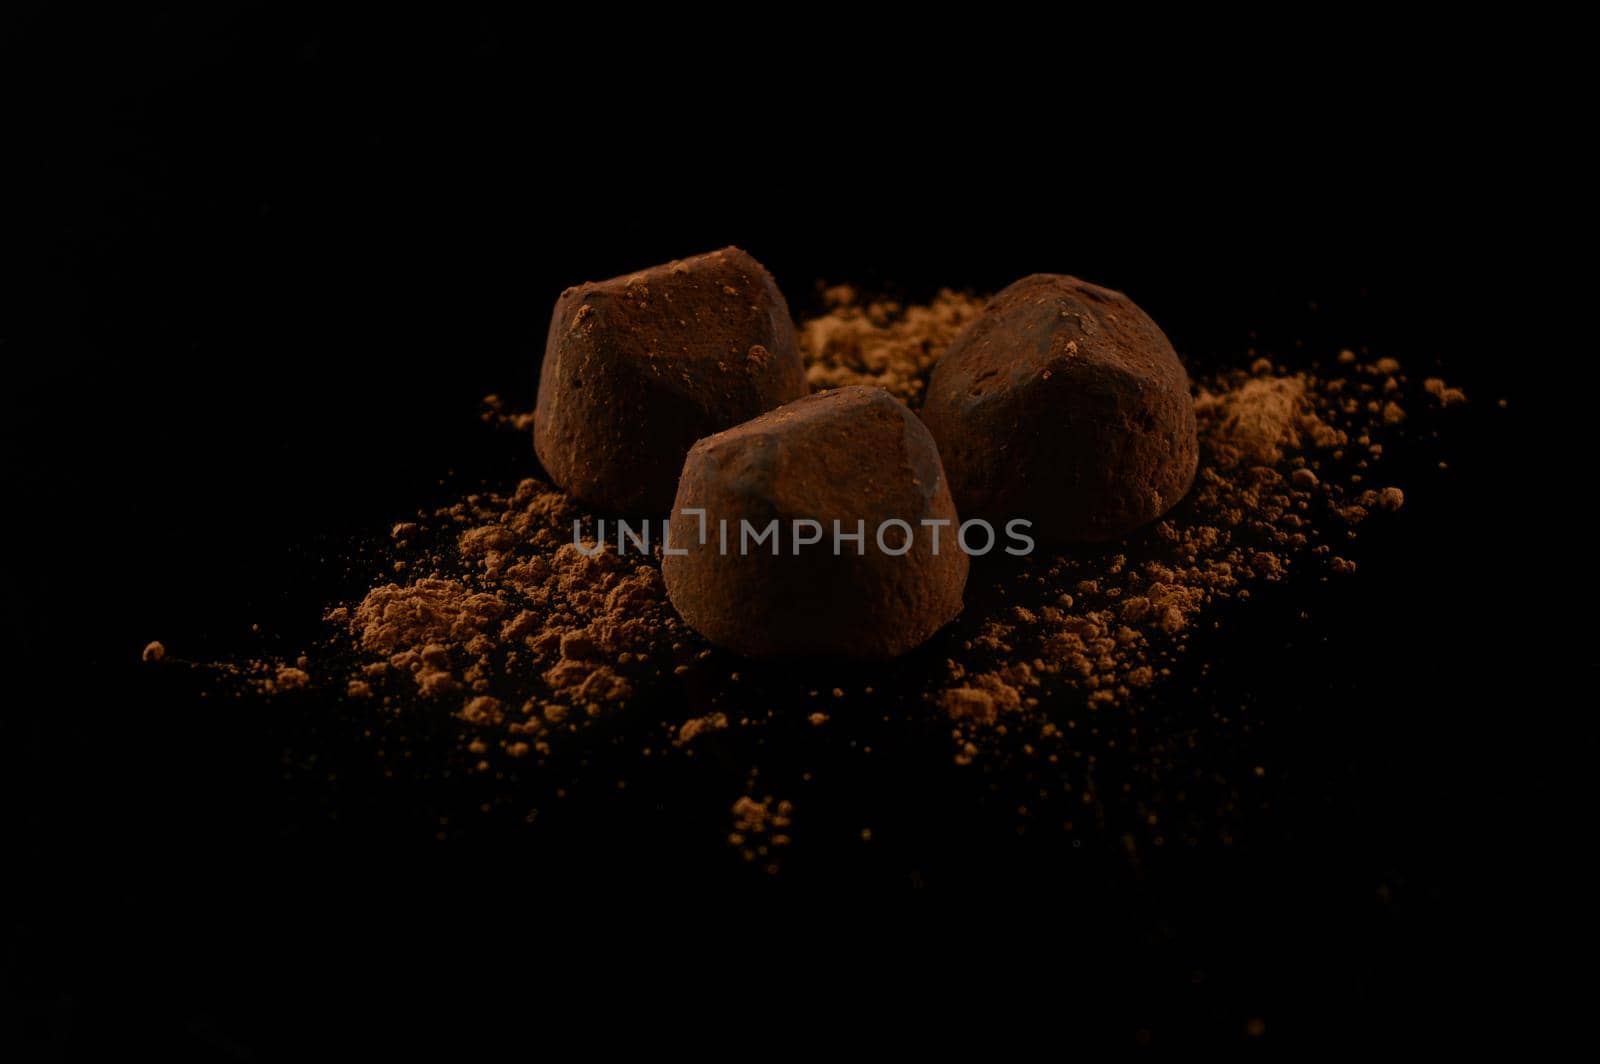 A group of three fine quality chocolate truffles over a black background.